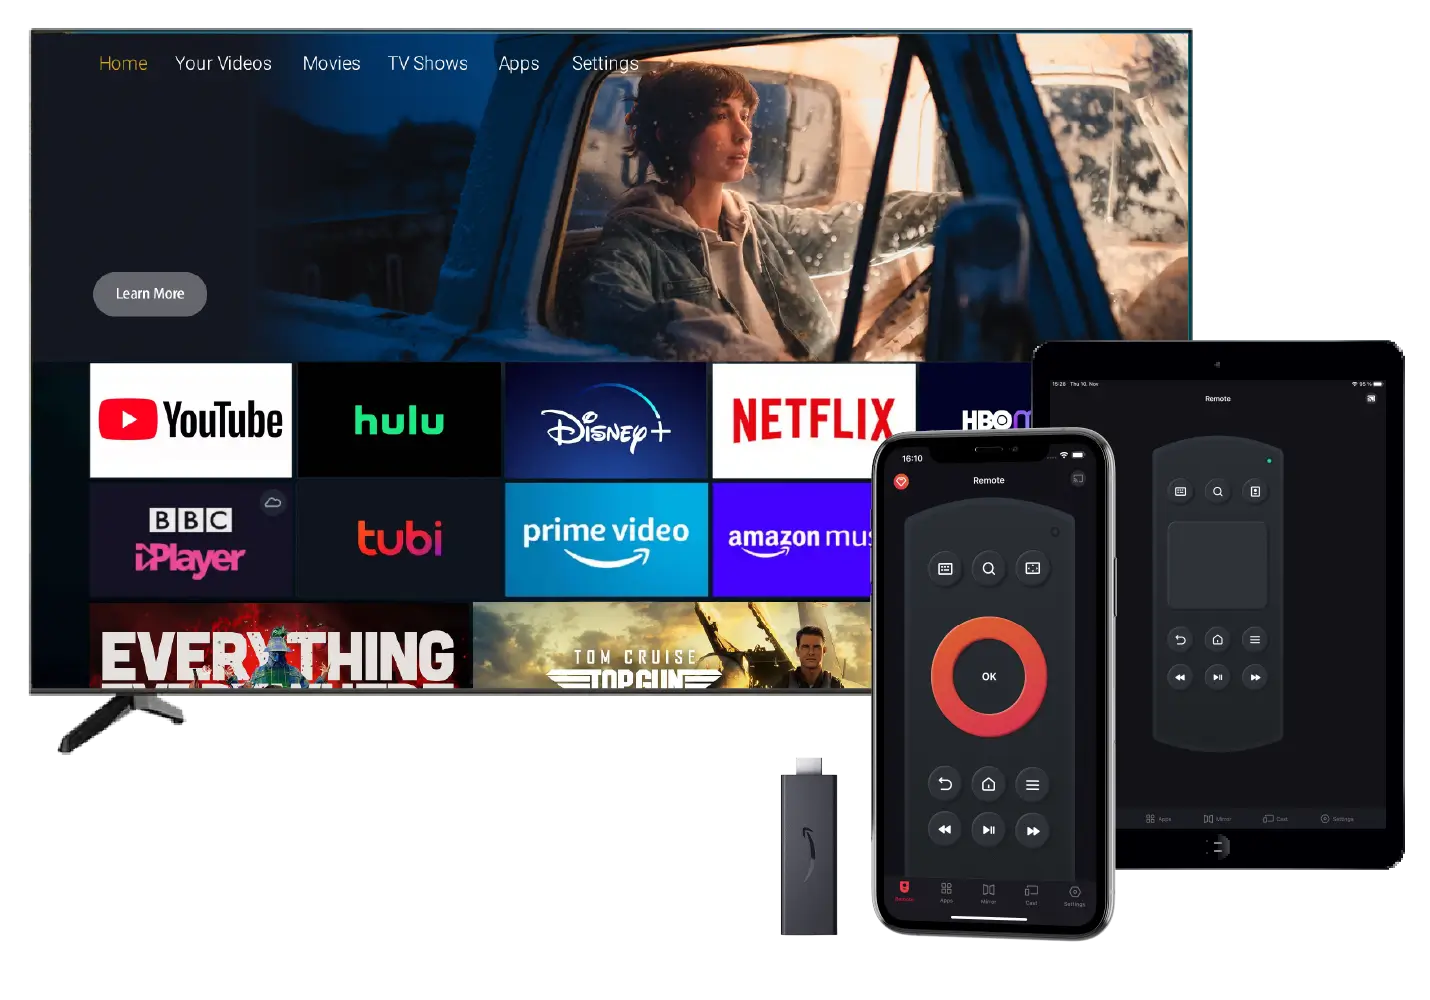 How To Cast To Firestick From Android?, Free App